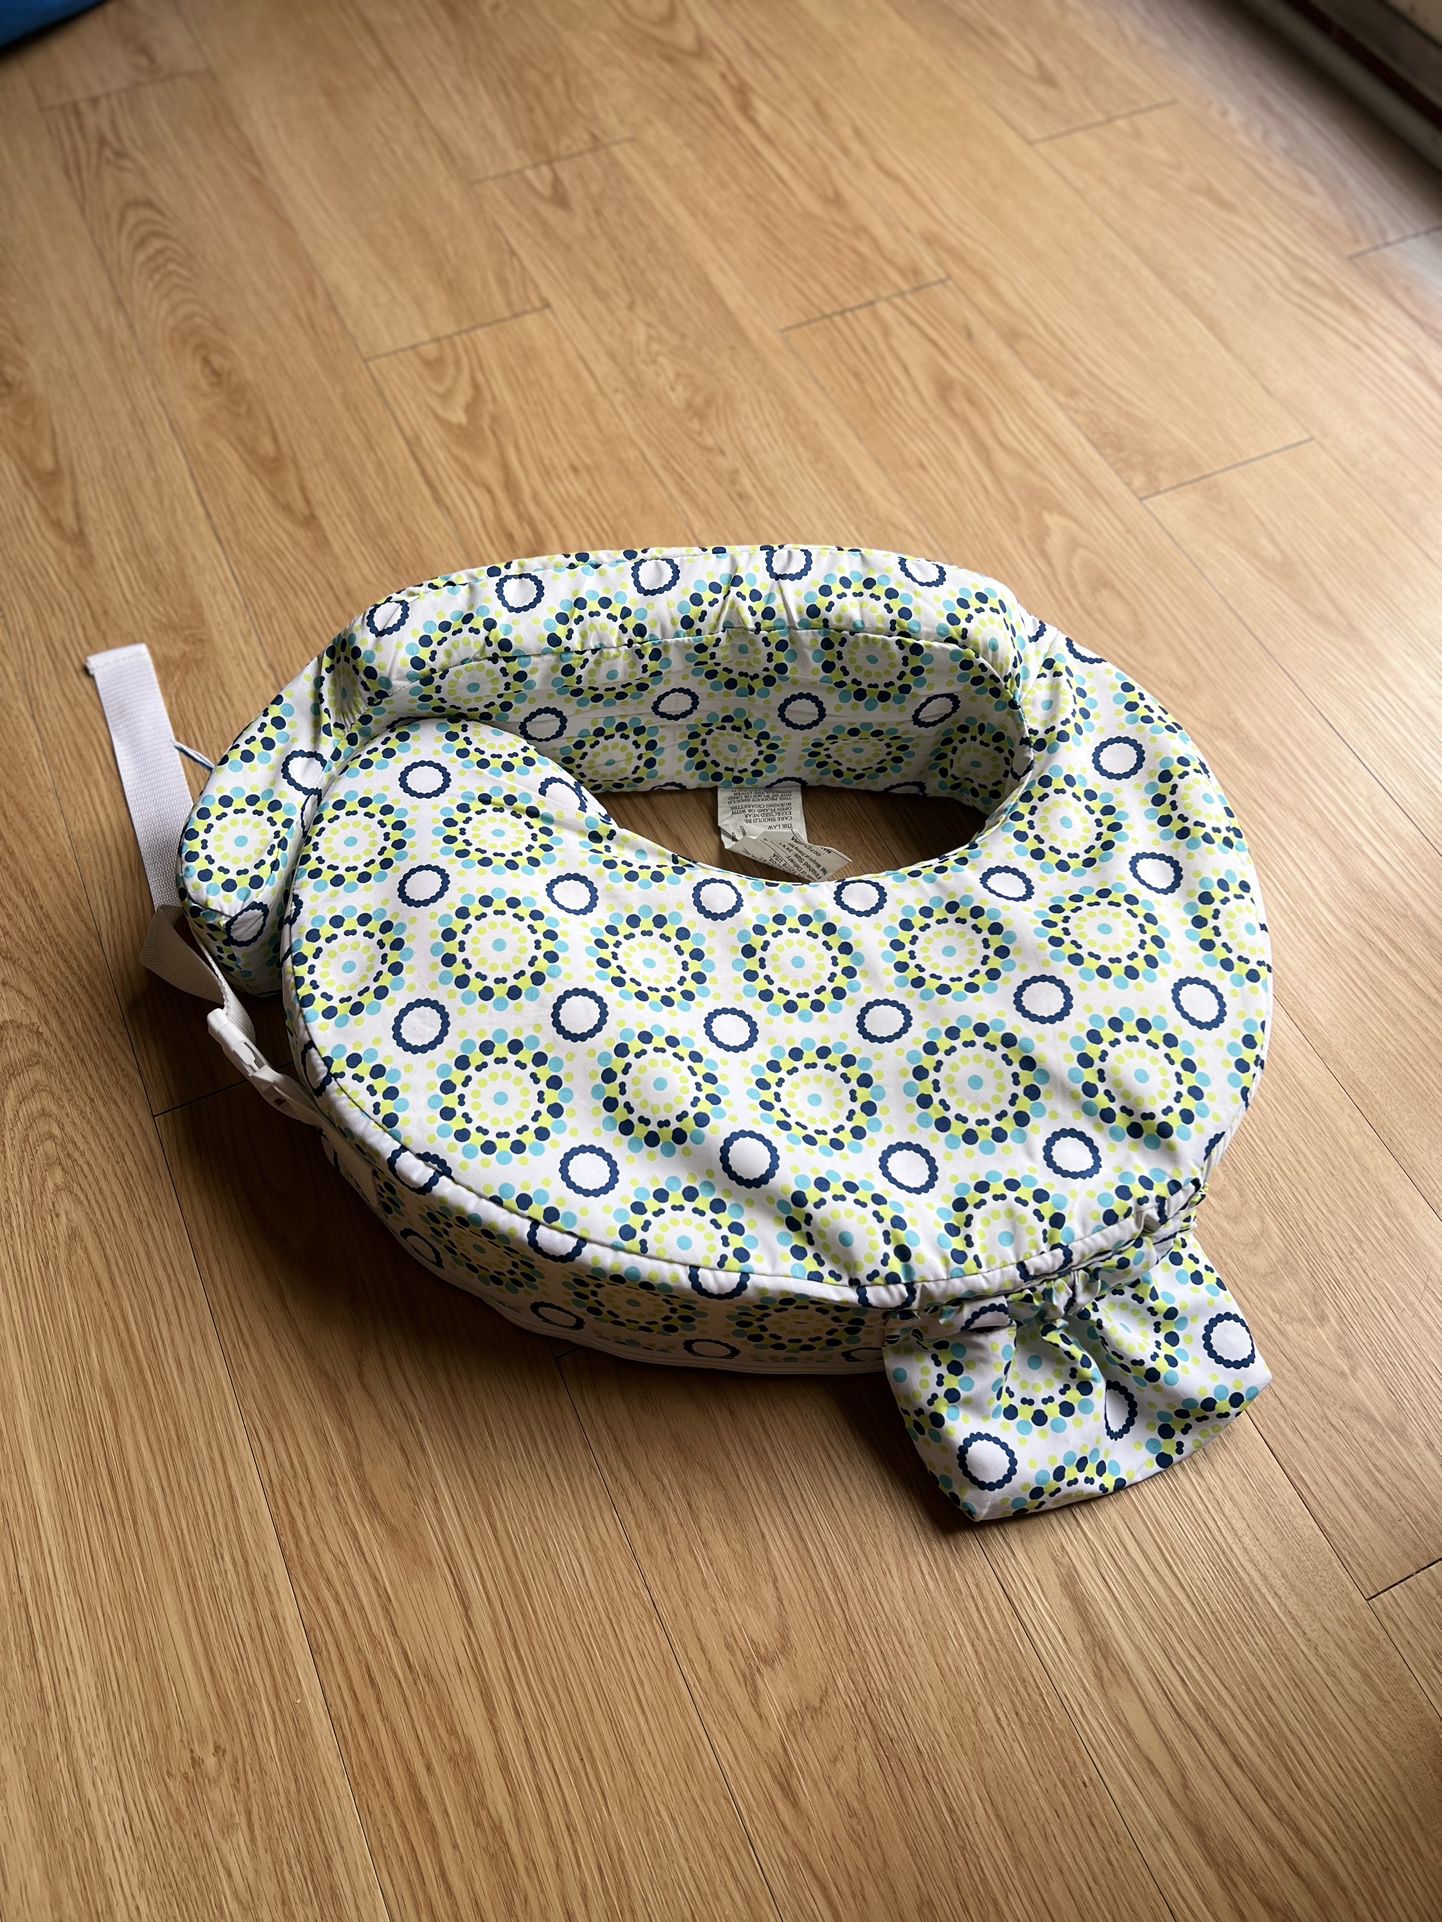 Nursing Pillow For Babies And New Borns